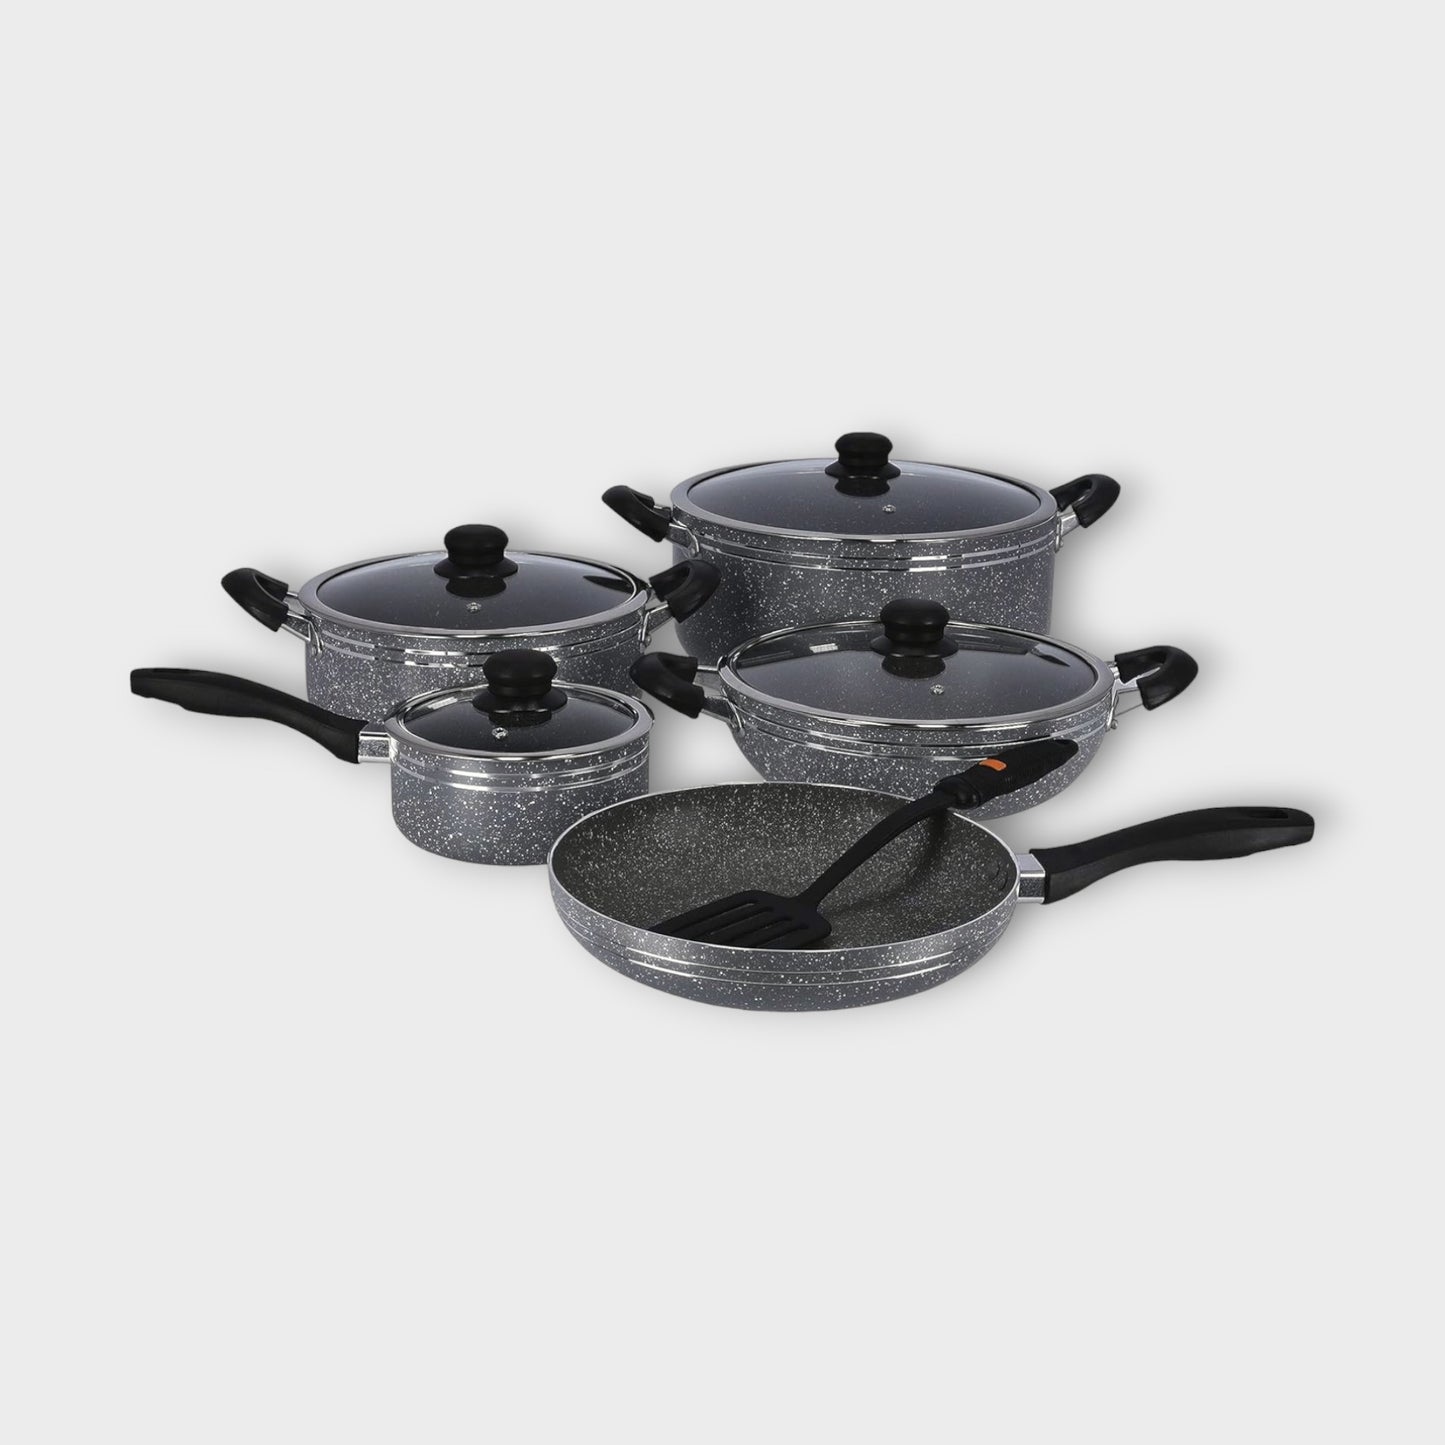 Non-Stick Granite Coated Cookware Set. Durable & Easy to Clean. Perfect for Everyday Cooking.